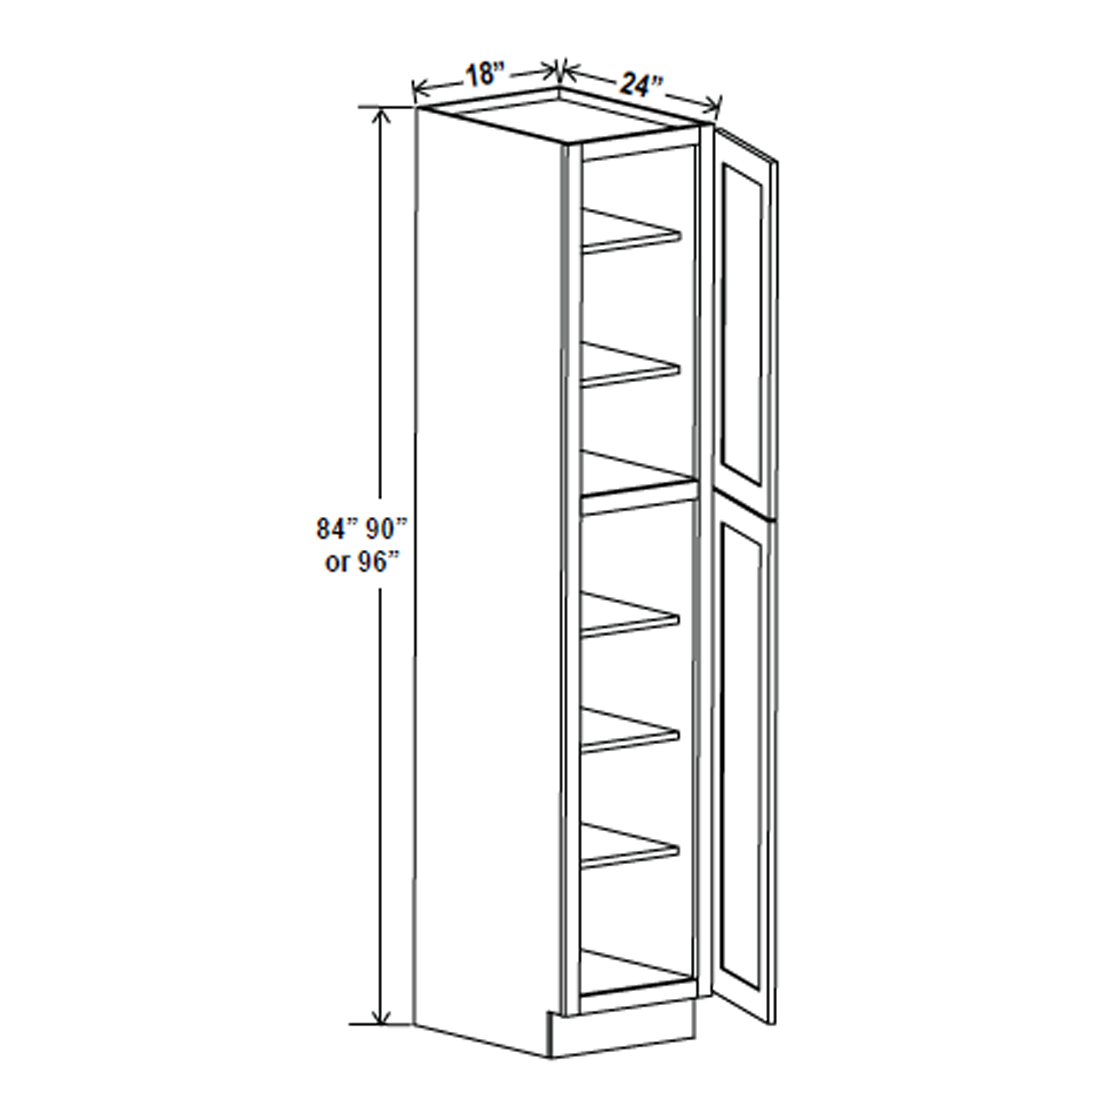 Wall Pantry Cabinet - 18W x 84H x 24D - Grey Shaker Cabinet